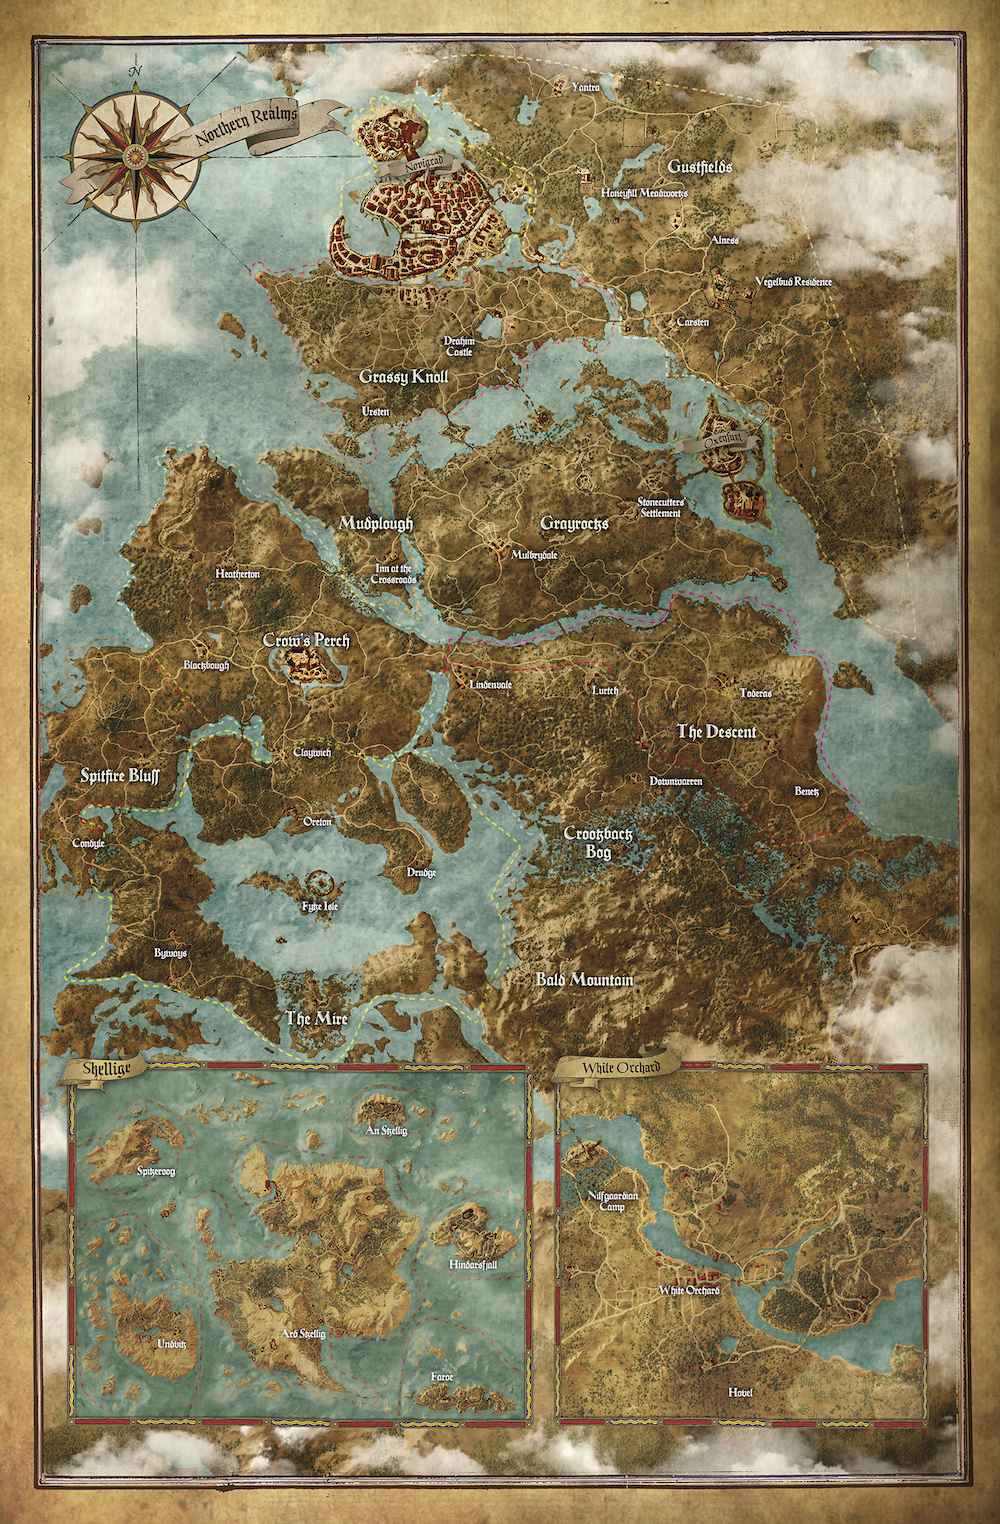 The Witcher 3 Is Even Bigger Than You Think